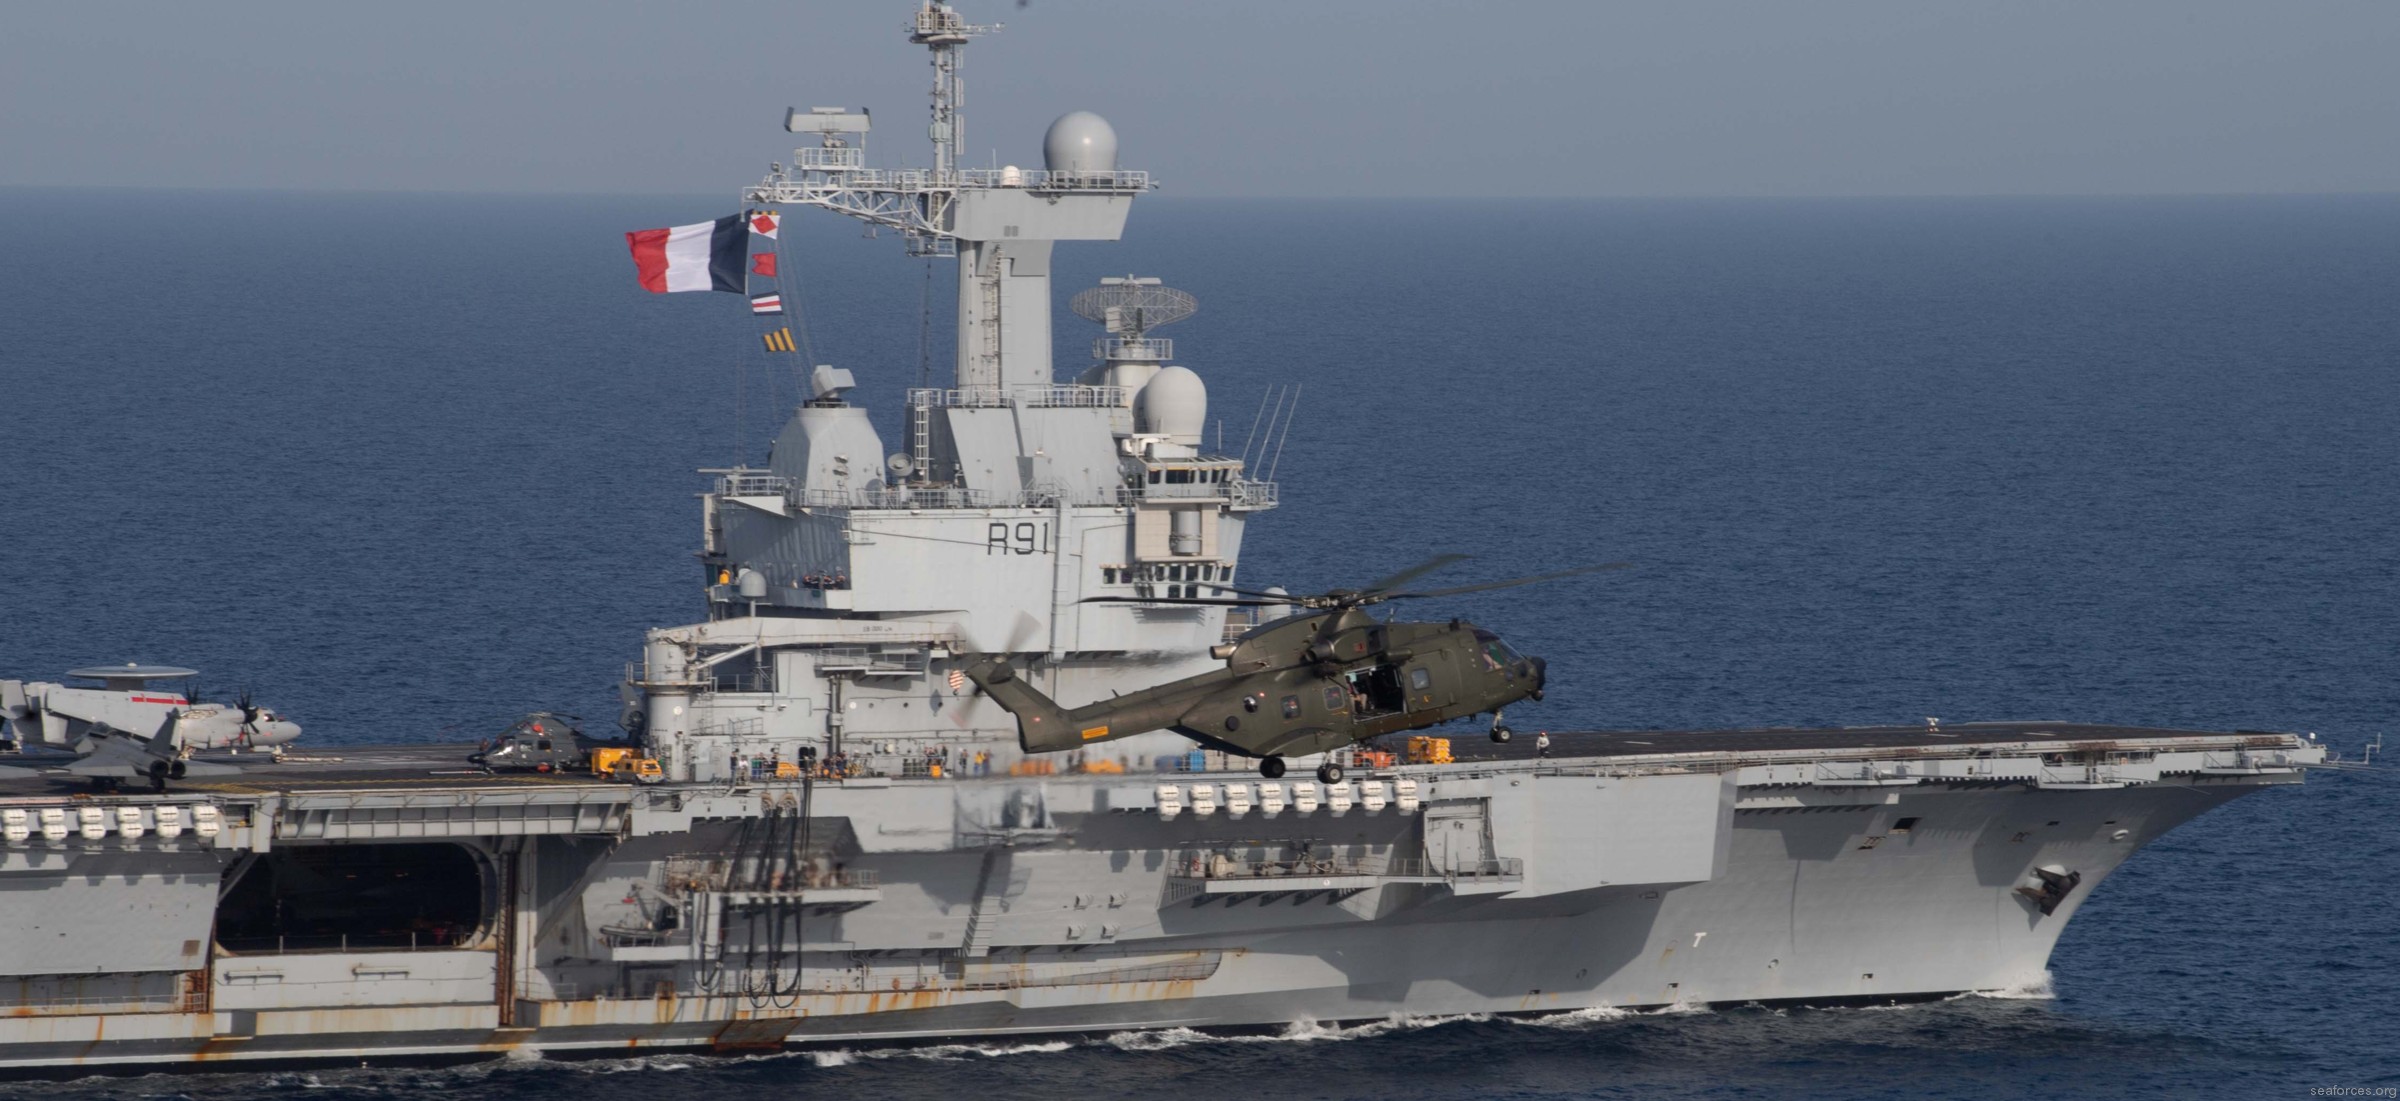 r-91 fs charles de gaulle aircraft carrier french navy marine nationale 54